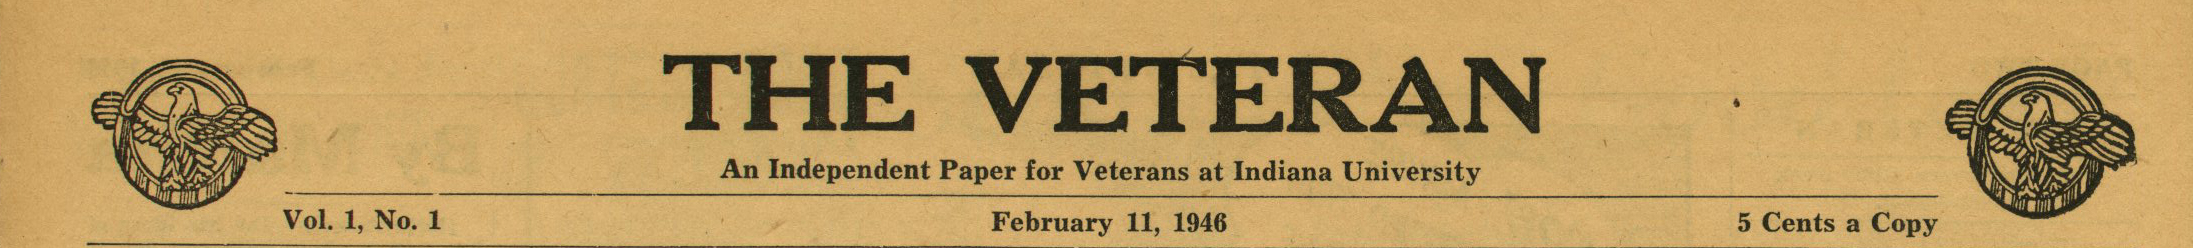 Masthead from "The Veteran: An Independent Paper for Veterans of Indiana University", Vol. 1, No. 1, February 11, 1946, 5 cents a copy